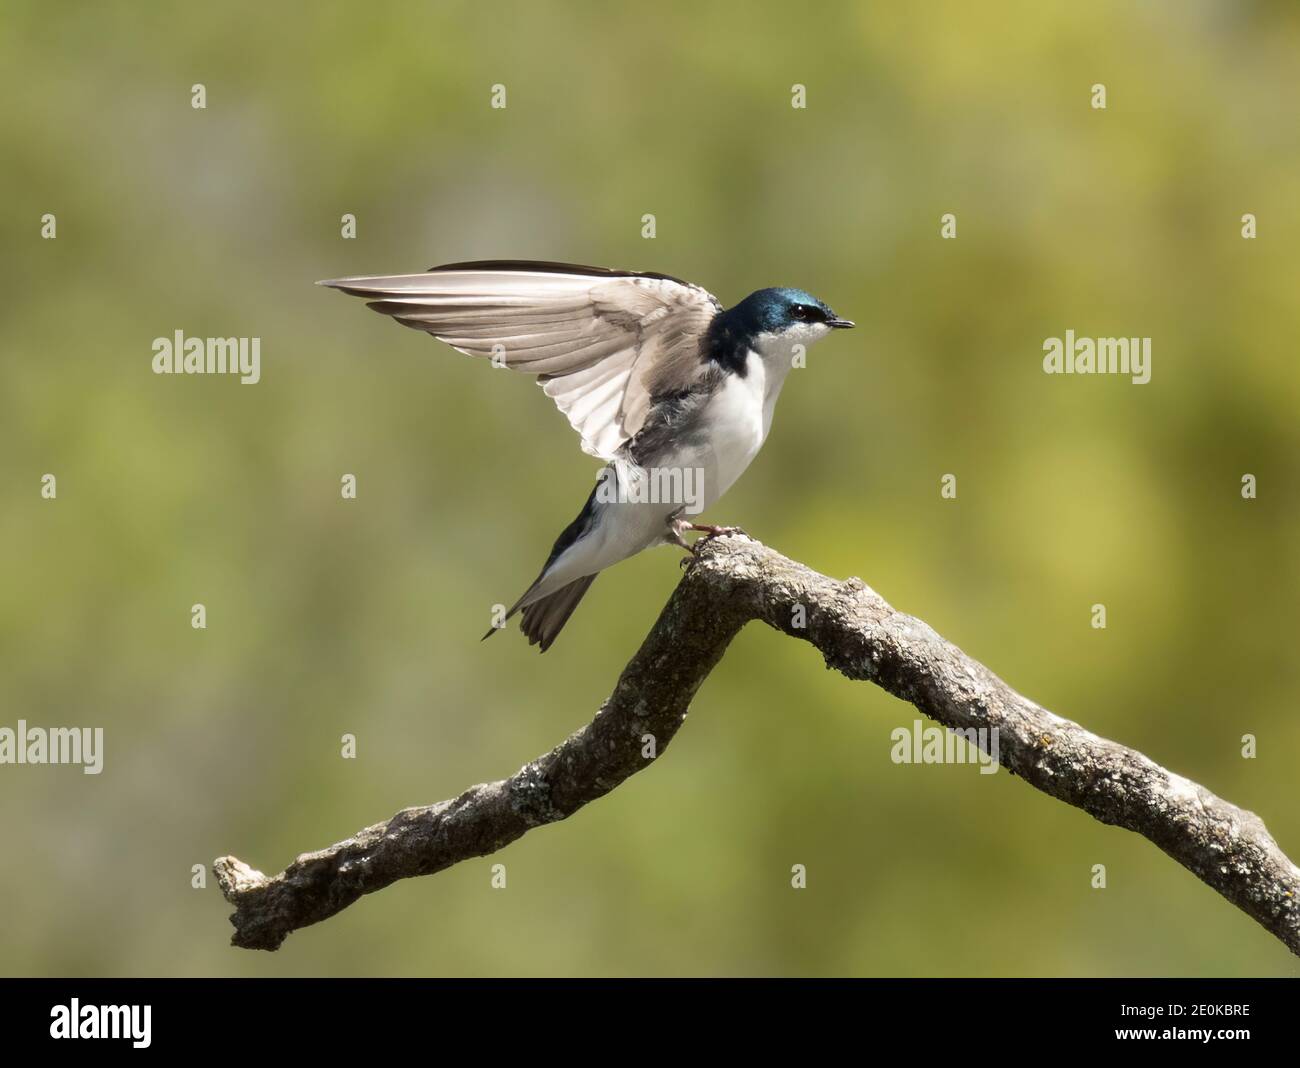 Tree Swallow alighting on a branch. Stock Photo